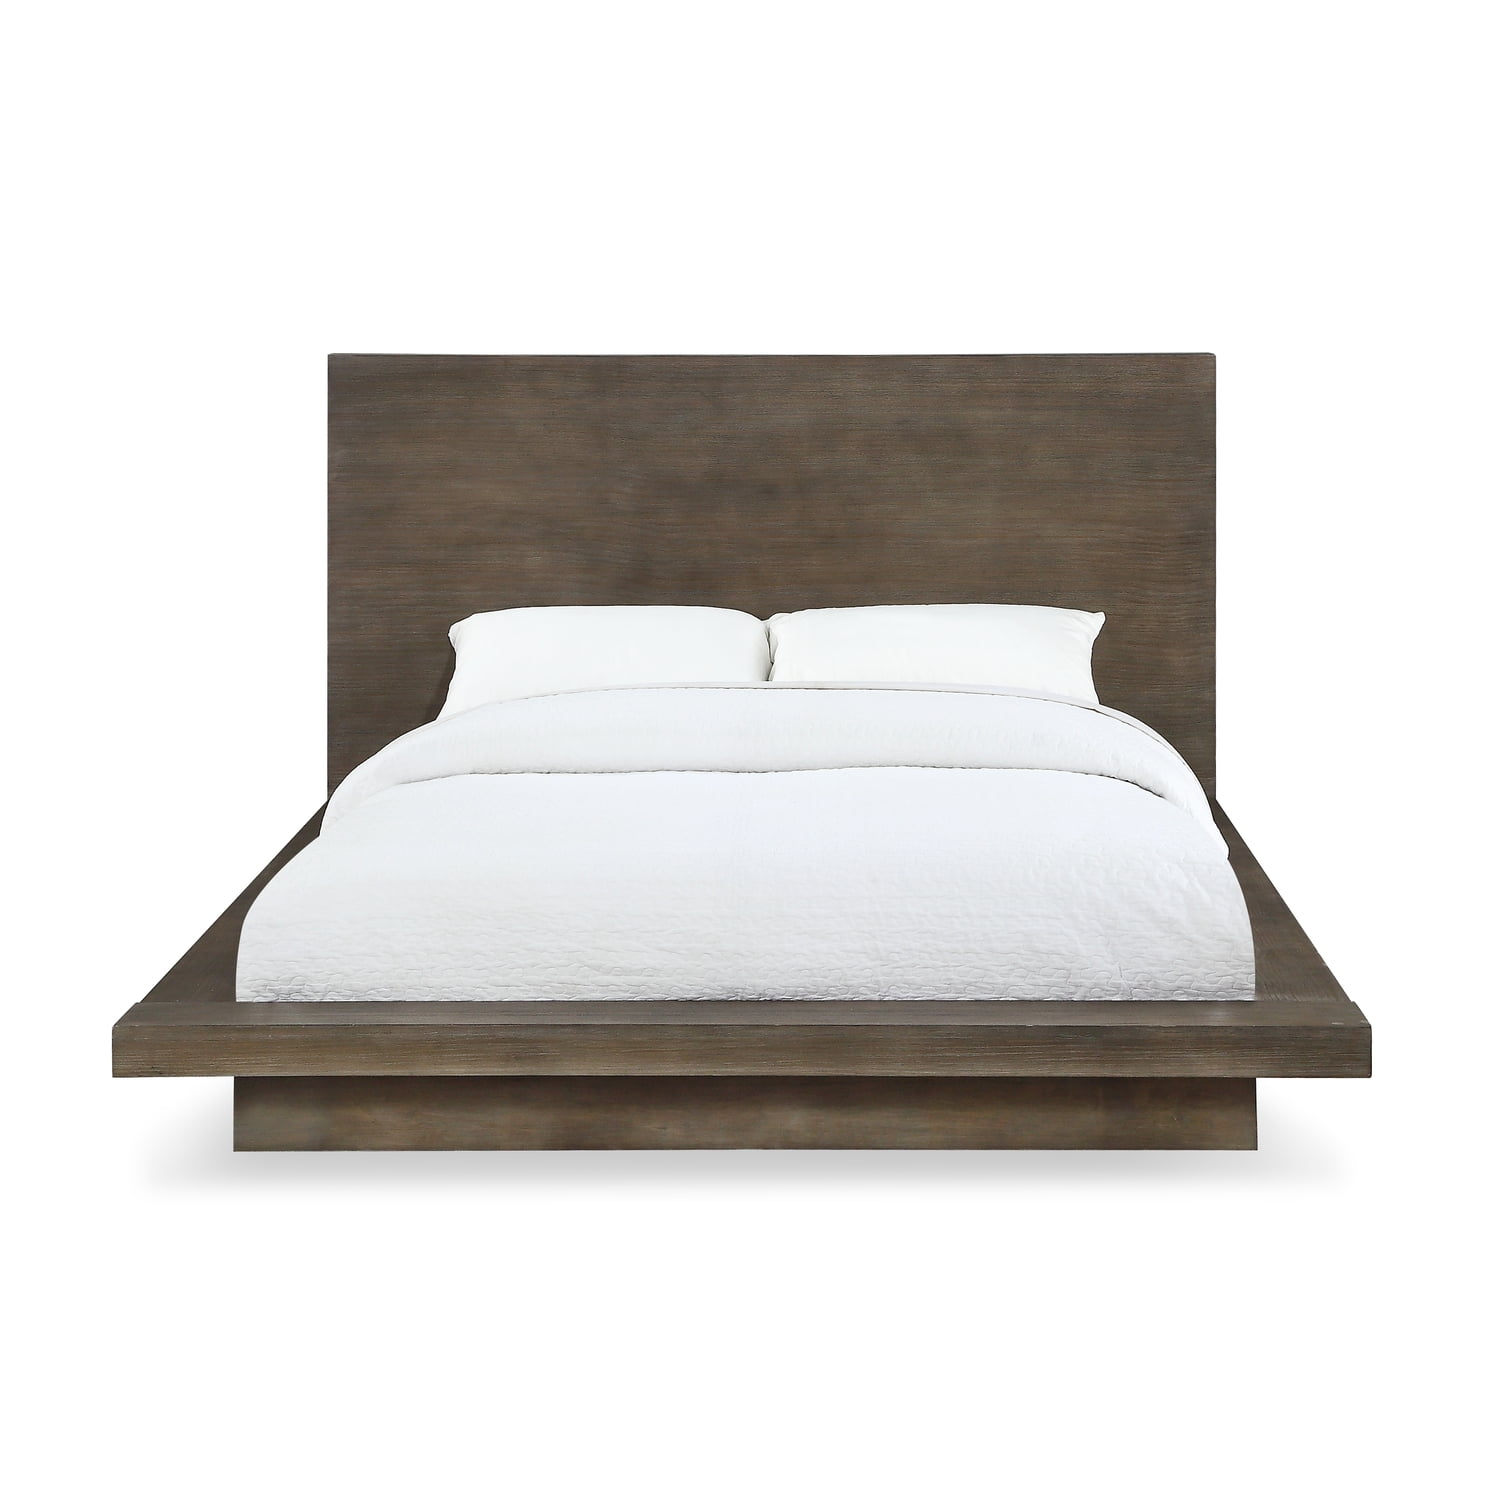 Modus Melbourne California King Size, King Size Panel Bed Frame